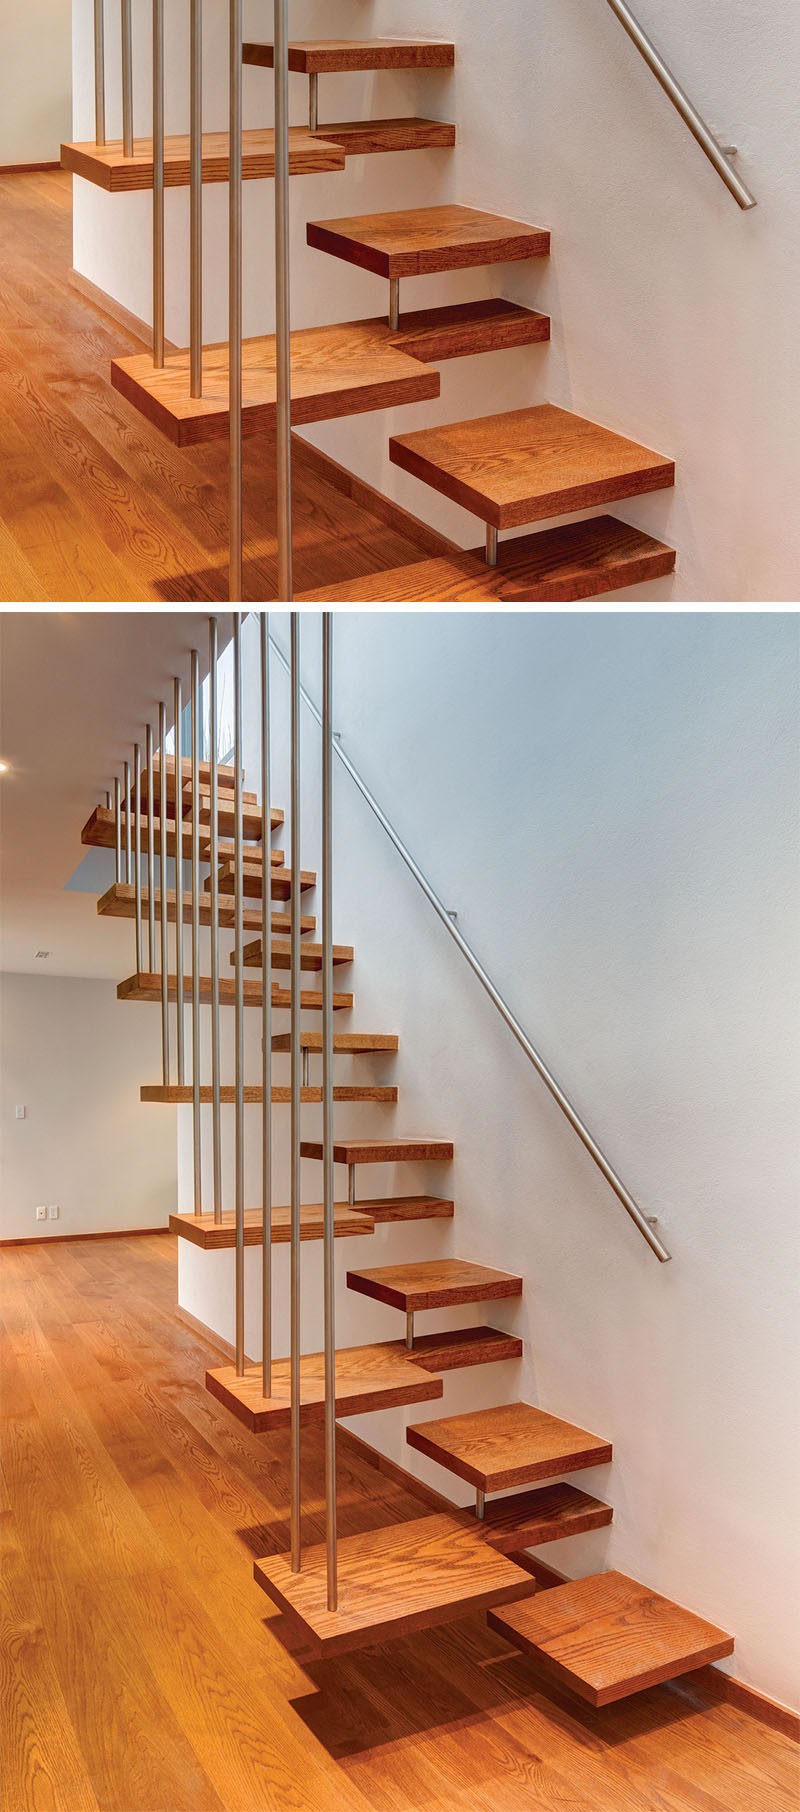 30+ Examples of Modern Stair Design That Are a Step Above the Rest